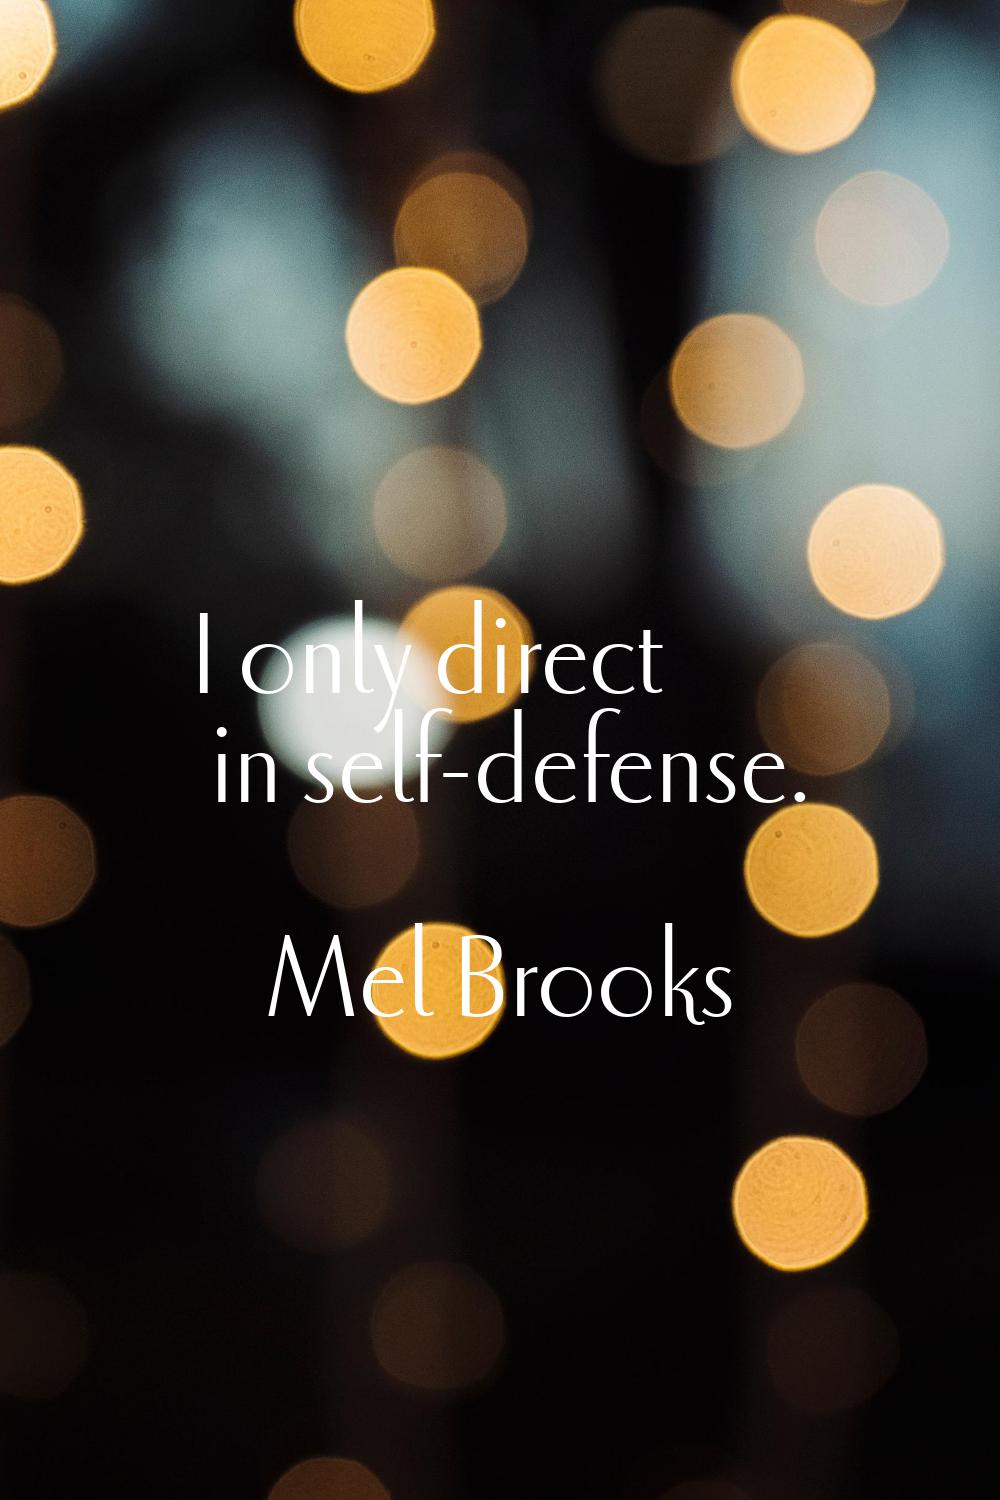 I only direct in self-defense.